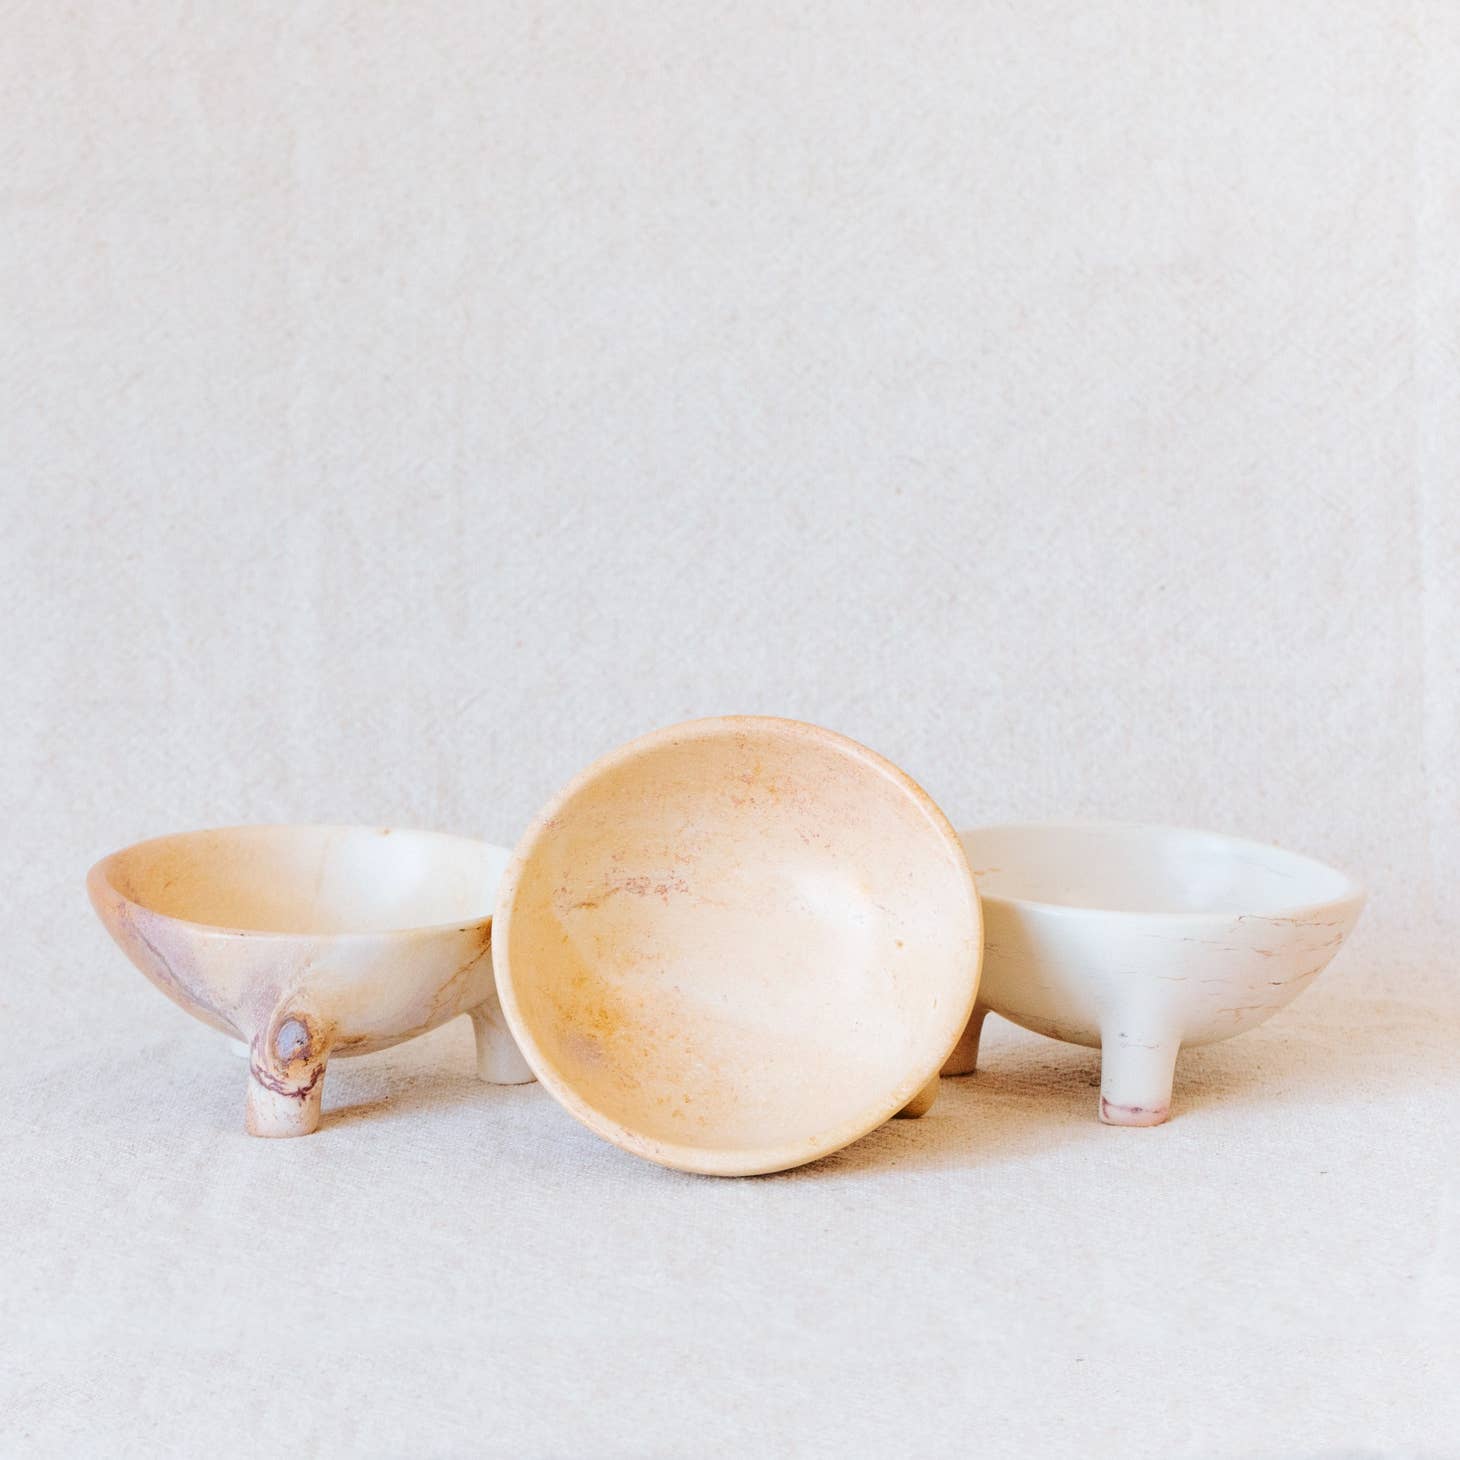 Versatile and visually appealing, this bowl is hand-carved from soapstone in western Kenya. Add them to your table as serving pieces or on your dresser or credenza to hold accessories. Ethically made in Kenya.